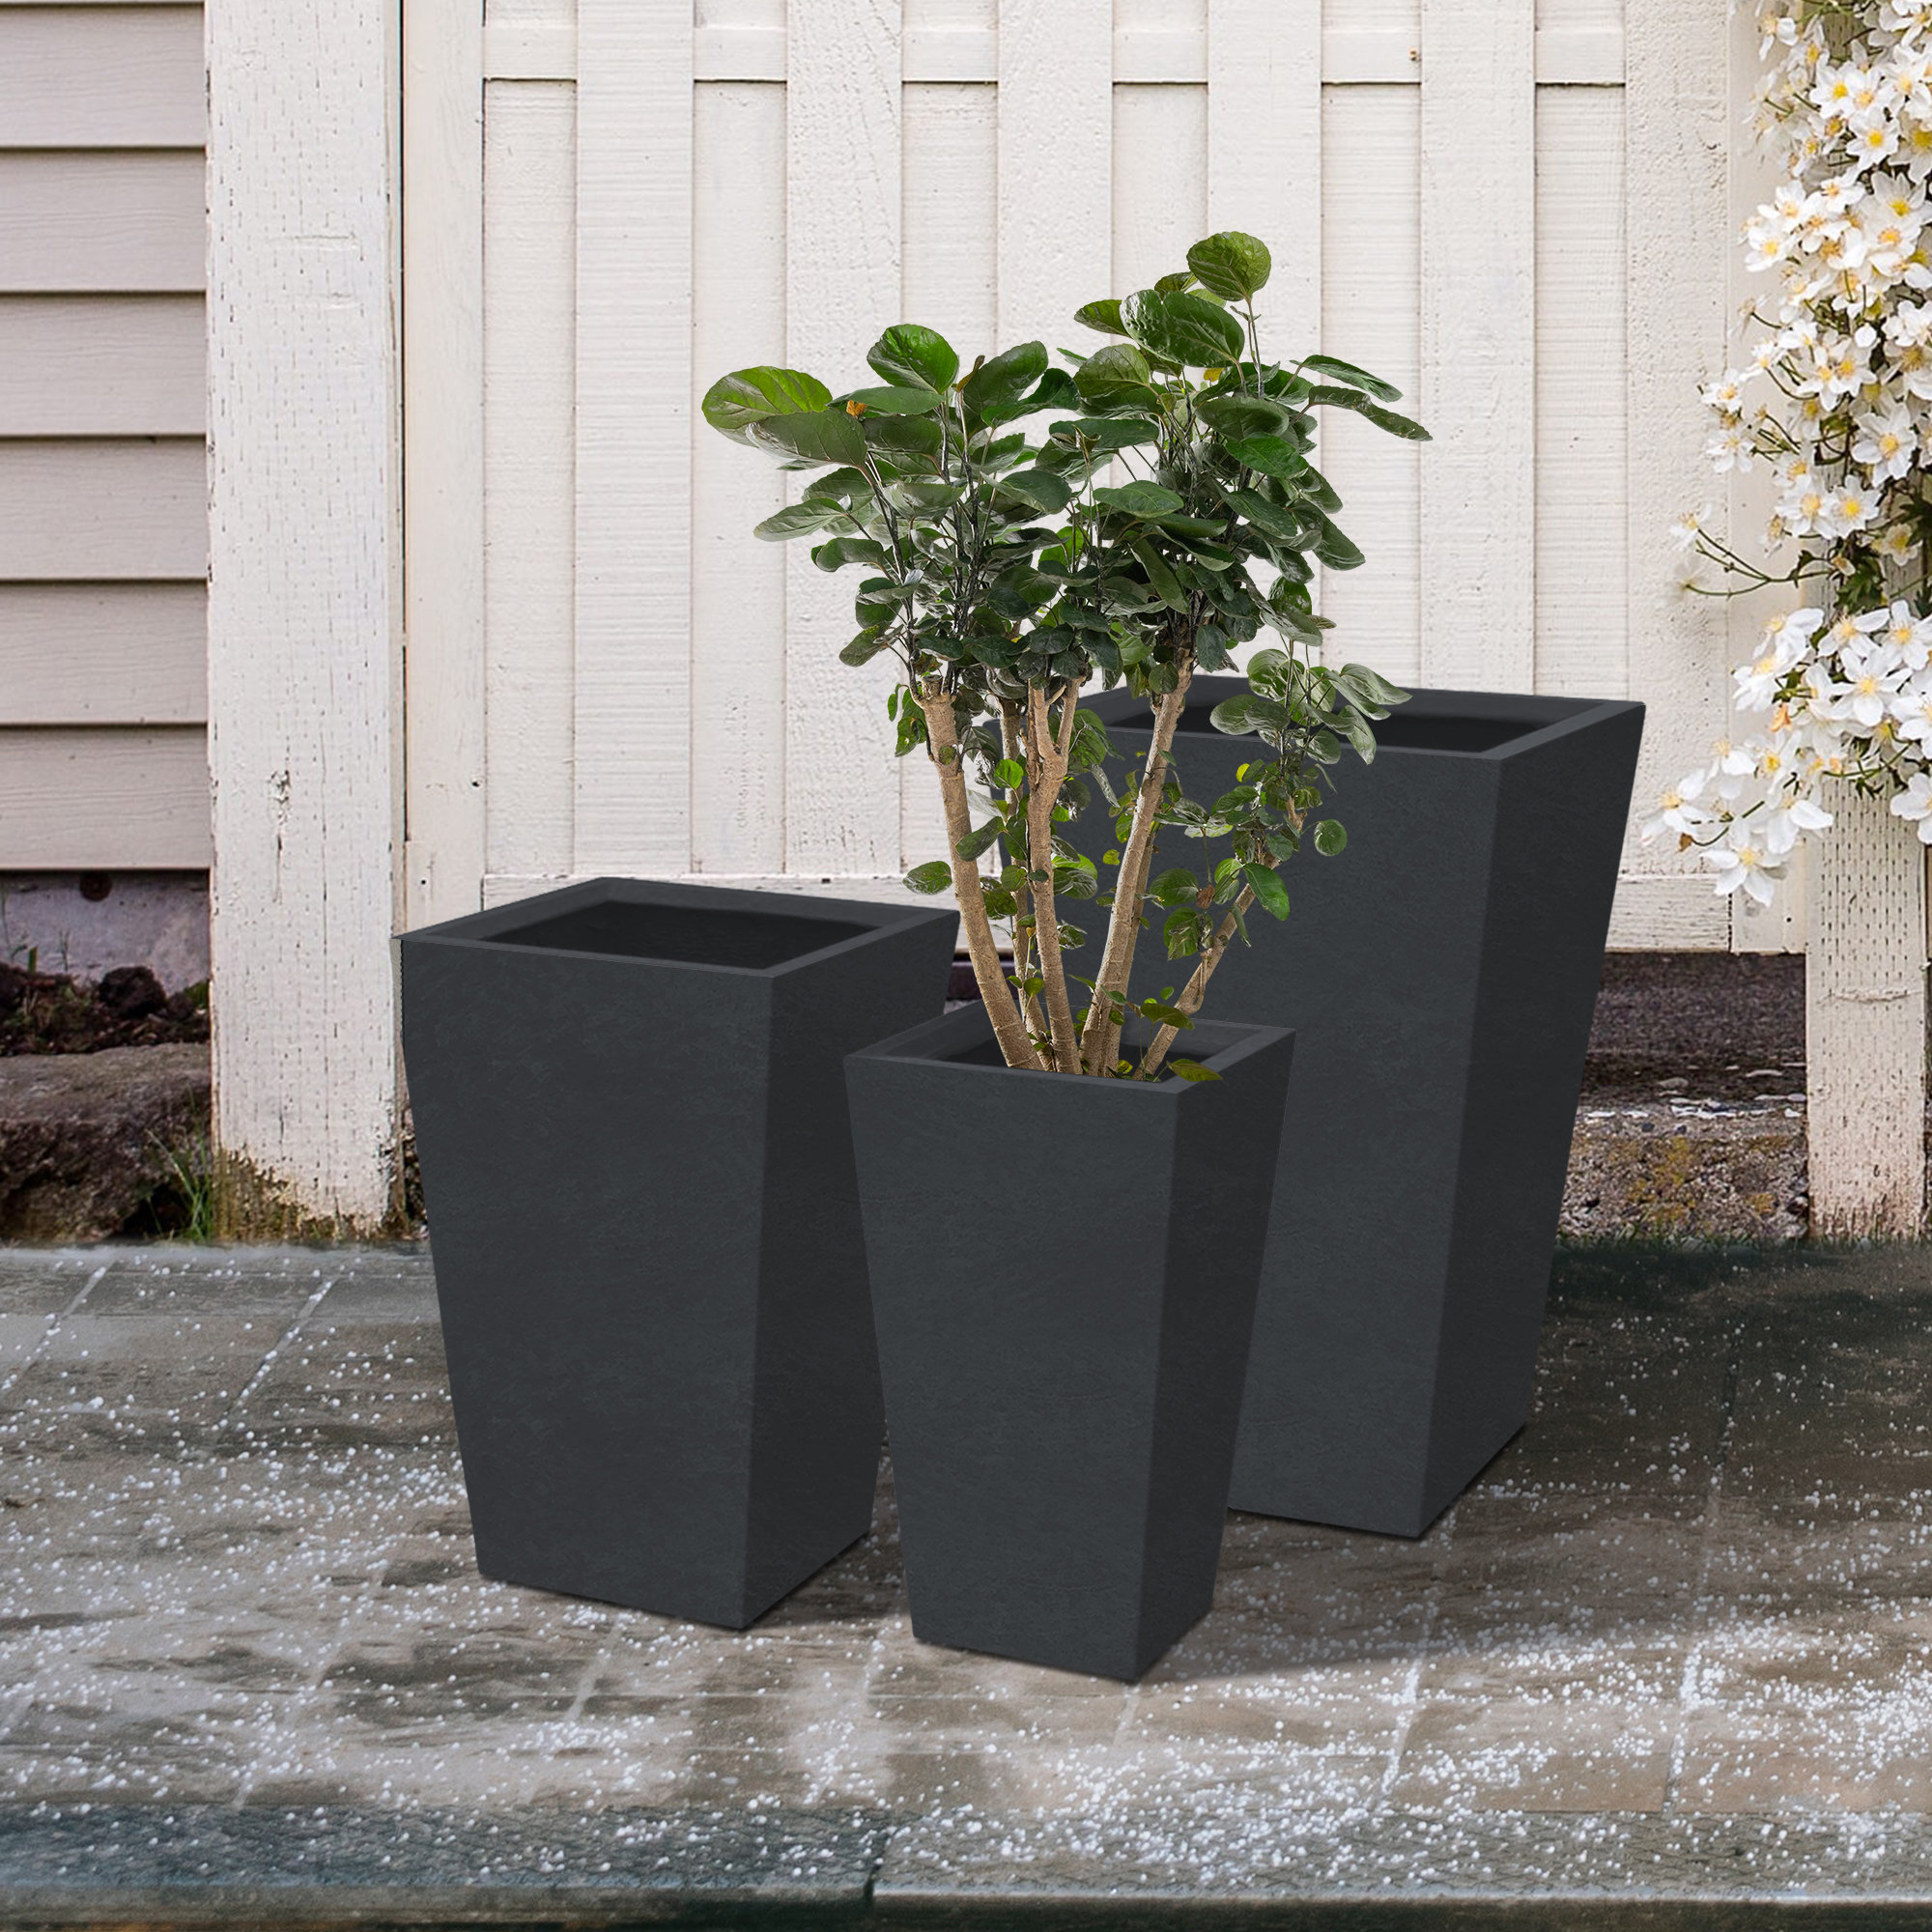 DIY Concrete Planters, Ideas for Outdoor Home Decorating with Flowers